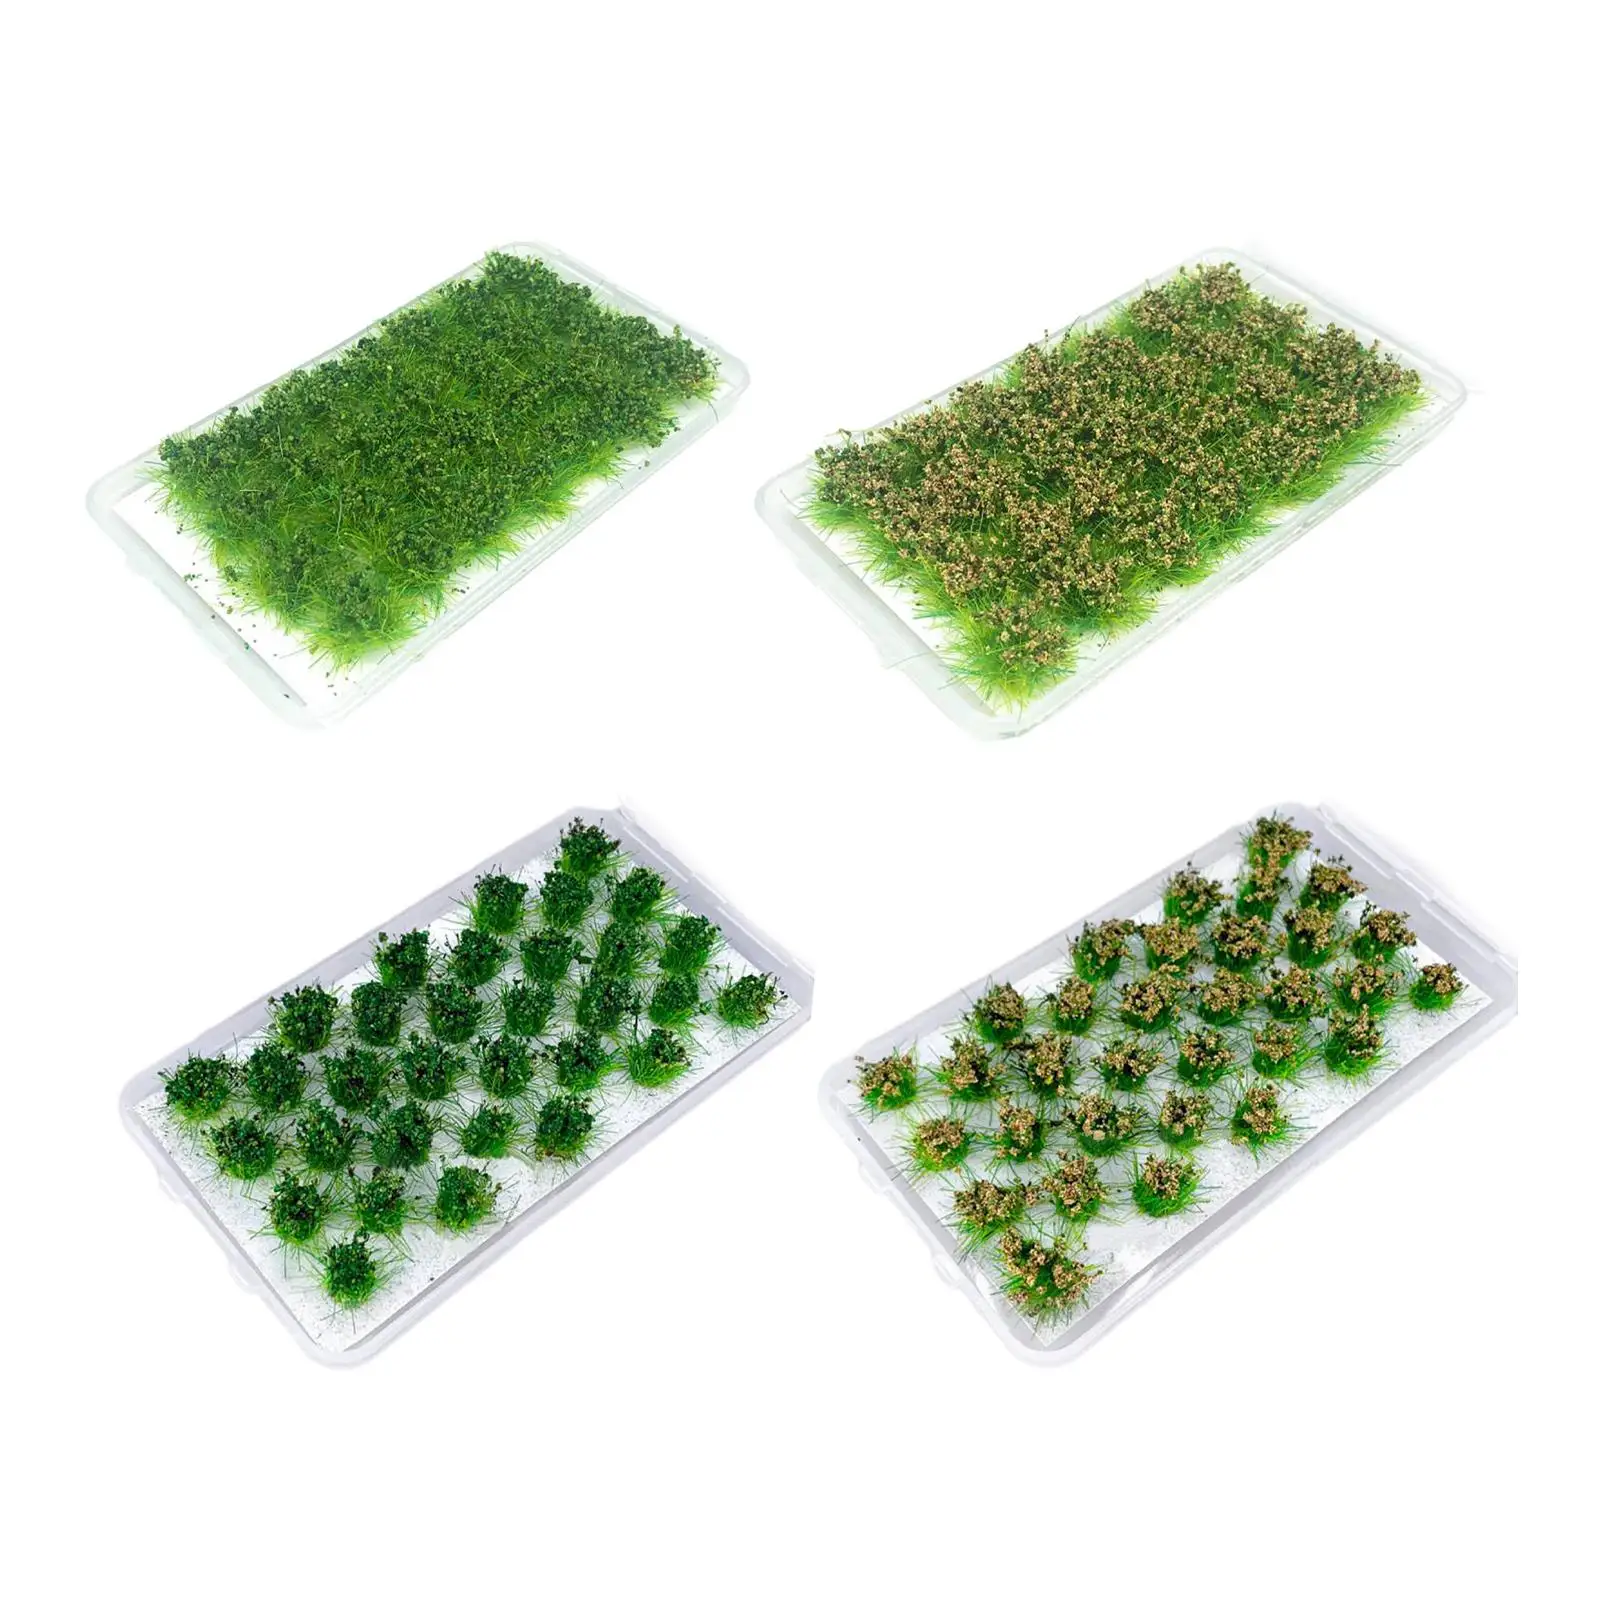 Cluster Grass Tufts Static Scenery Model Miniature Dioramas Railroad Scenery Sand Gaming Terrain Modeling Miniature Grass Tufts